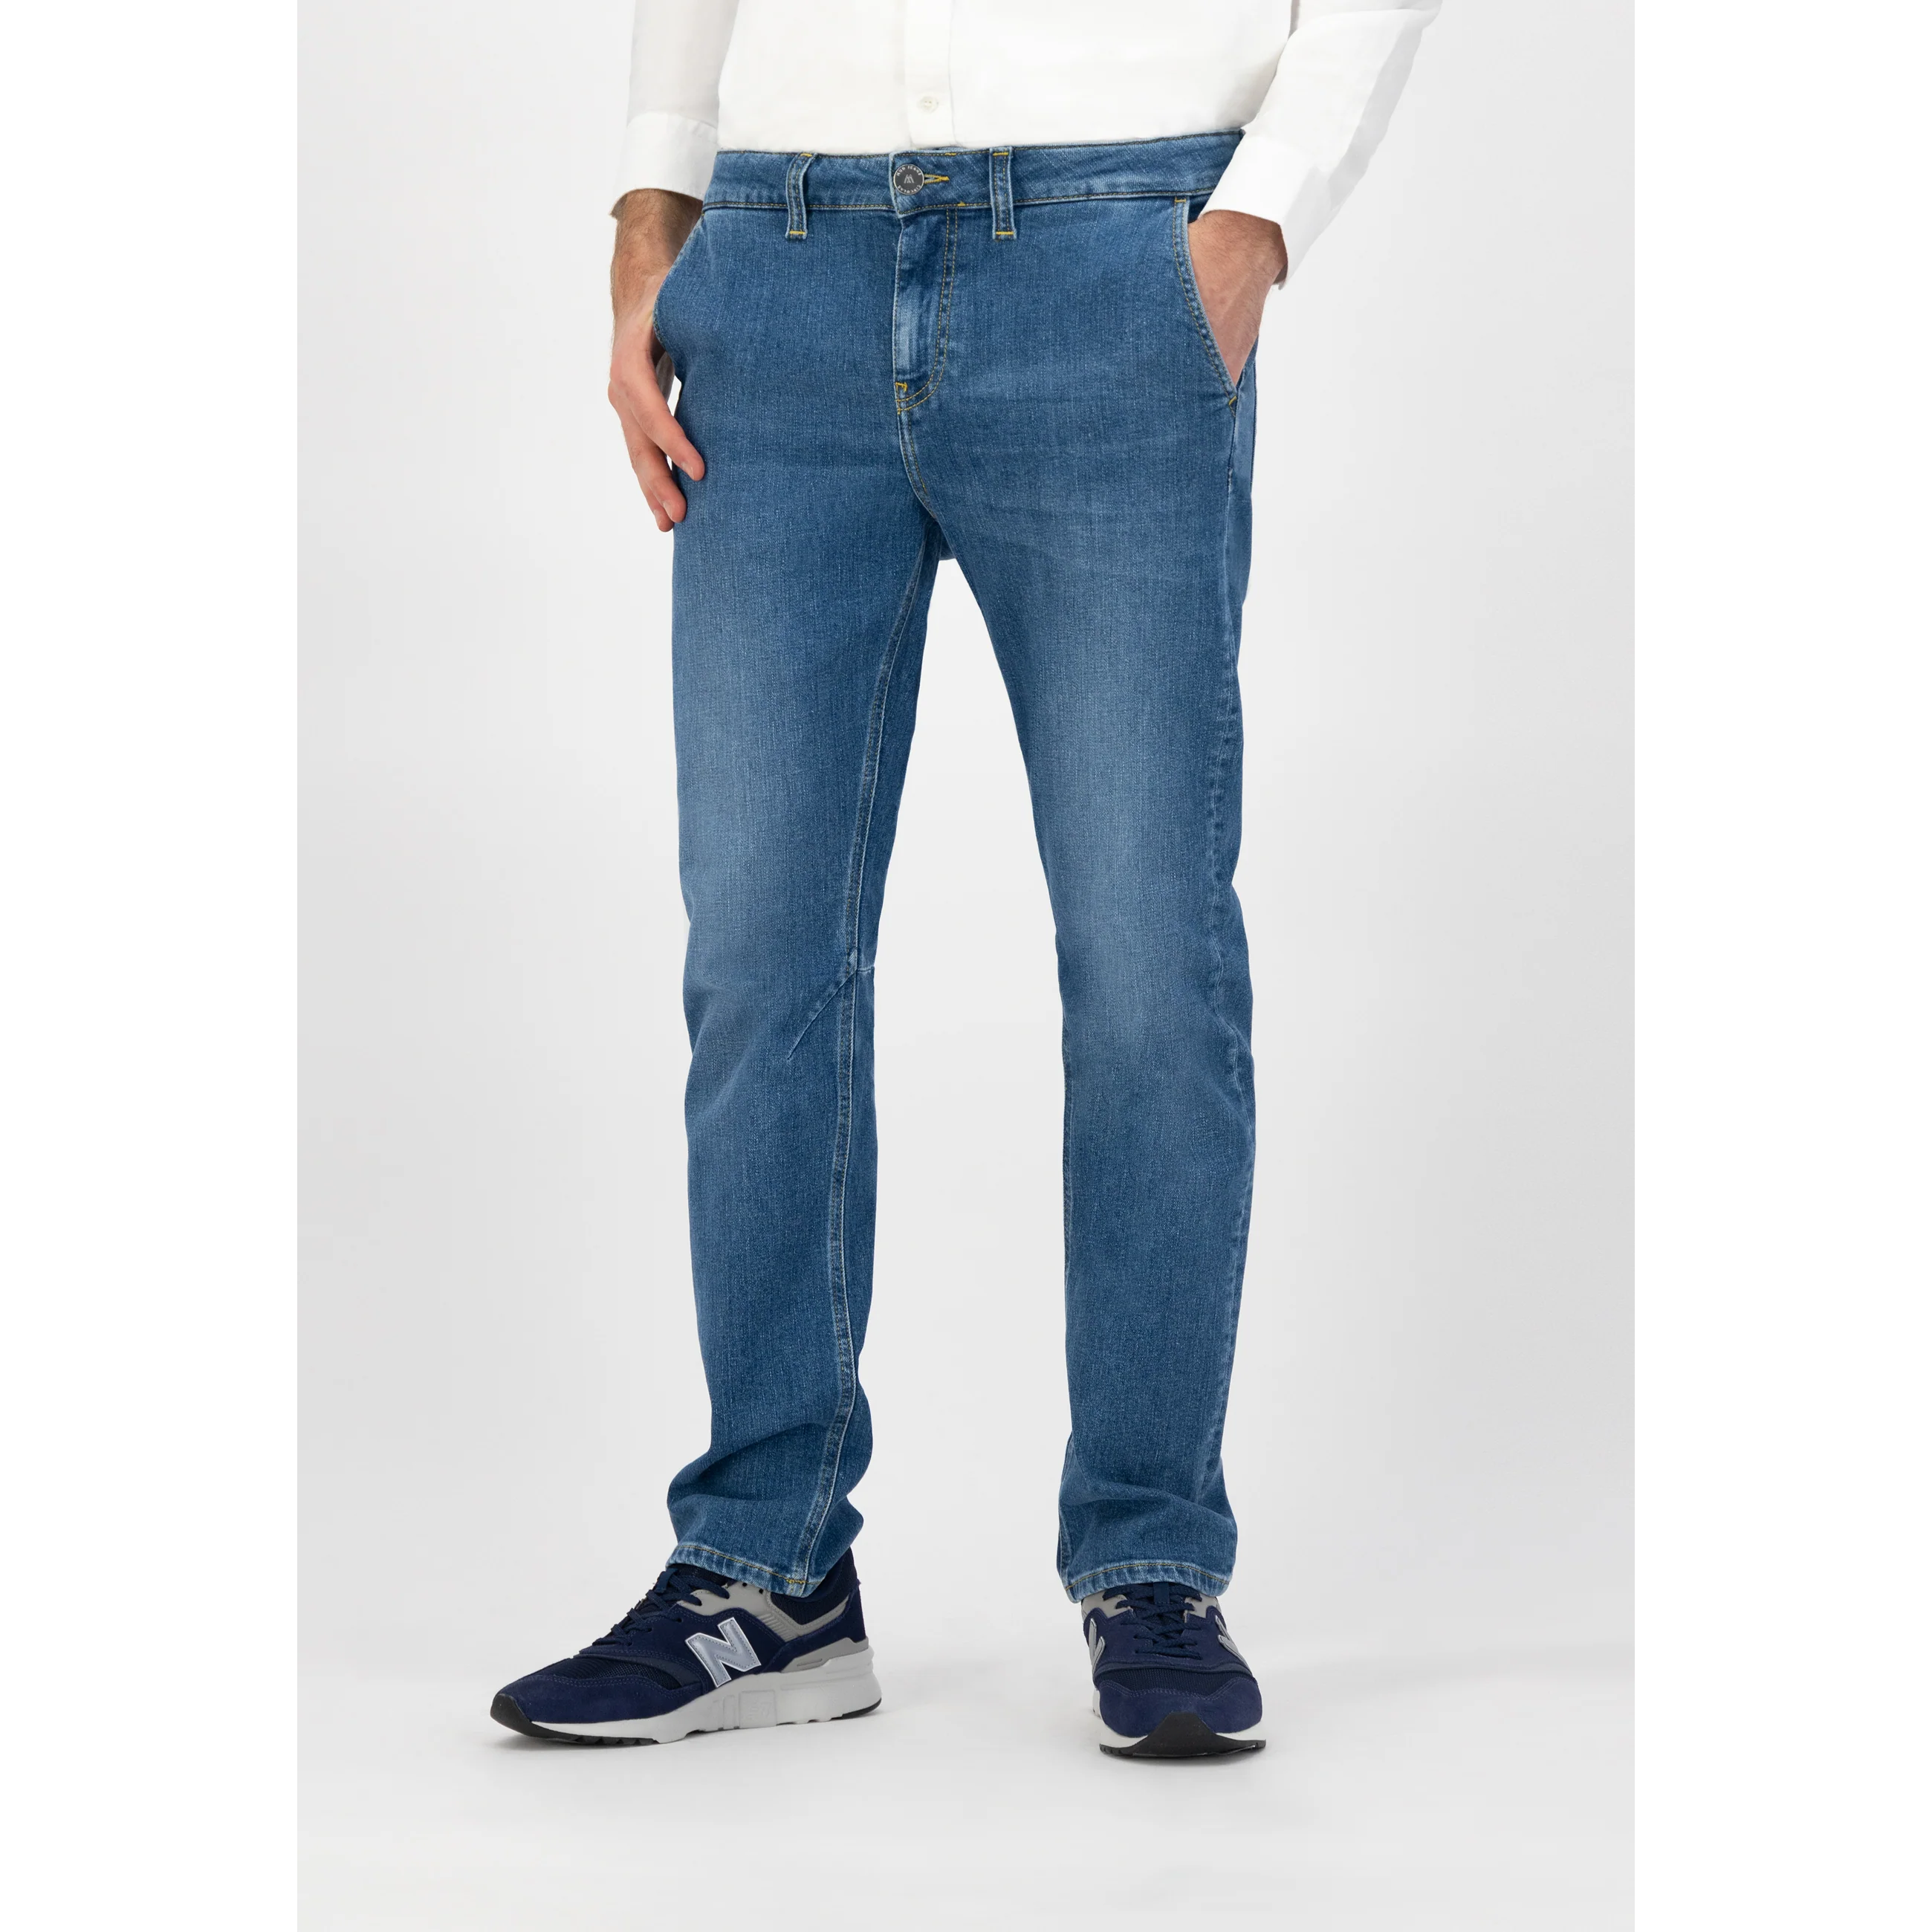 Mud Jeans Block Chino Slim Fit Tapered Stretch Jeans